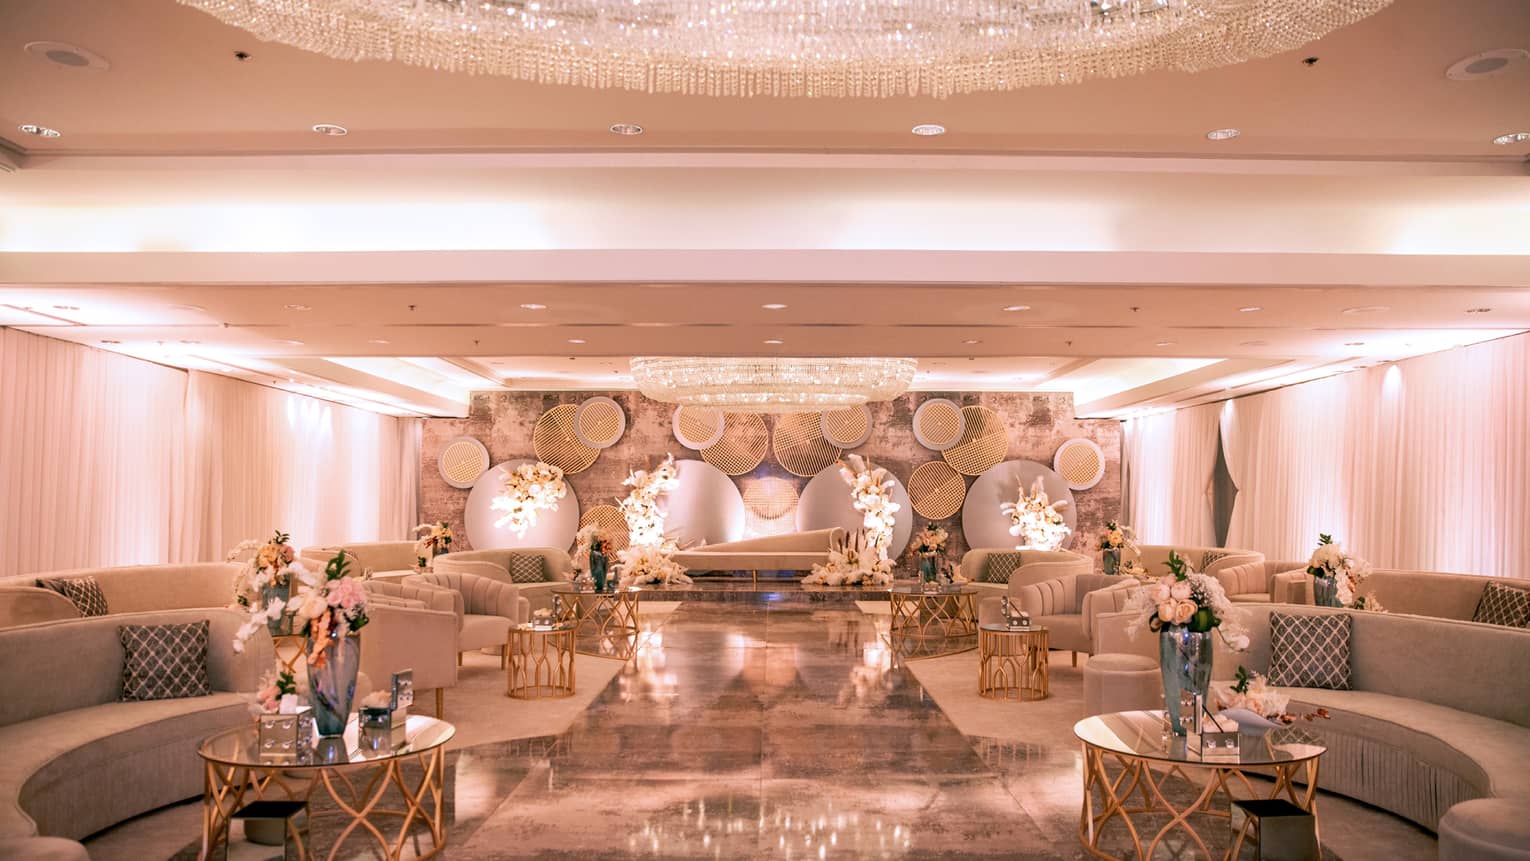 Elegant ballroom with rows of curved sofas, coffee tables and flowers under large dome chandelier